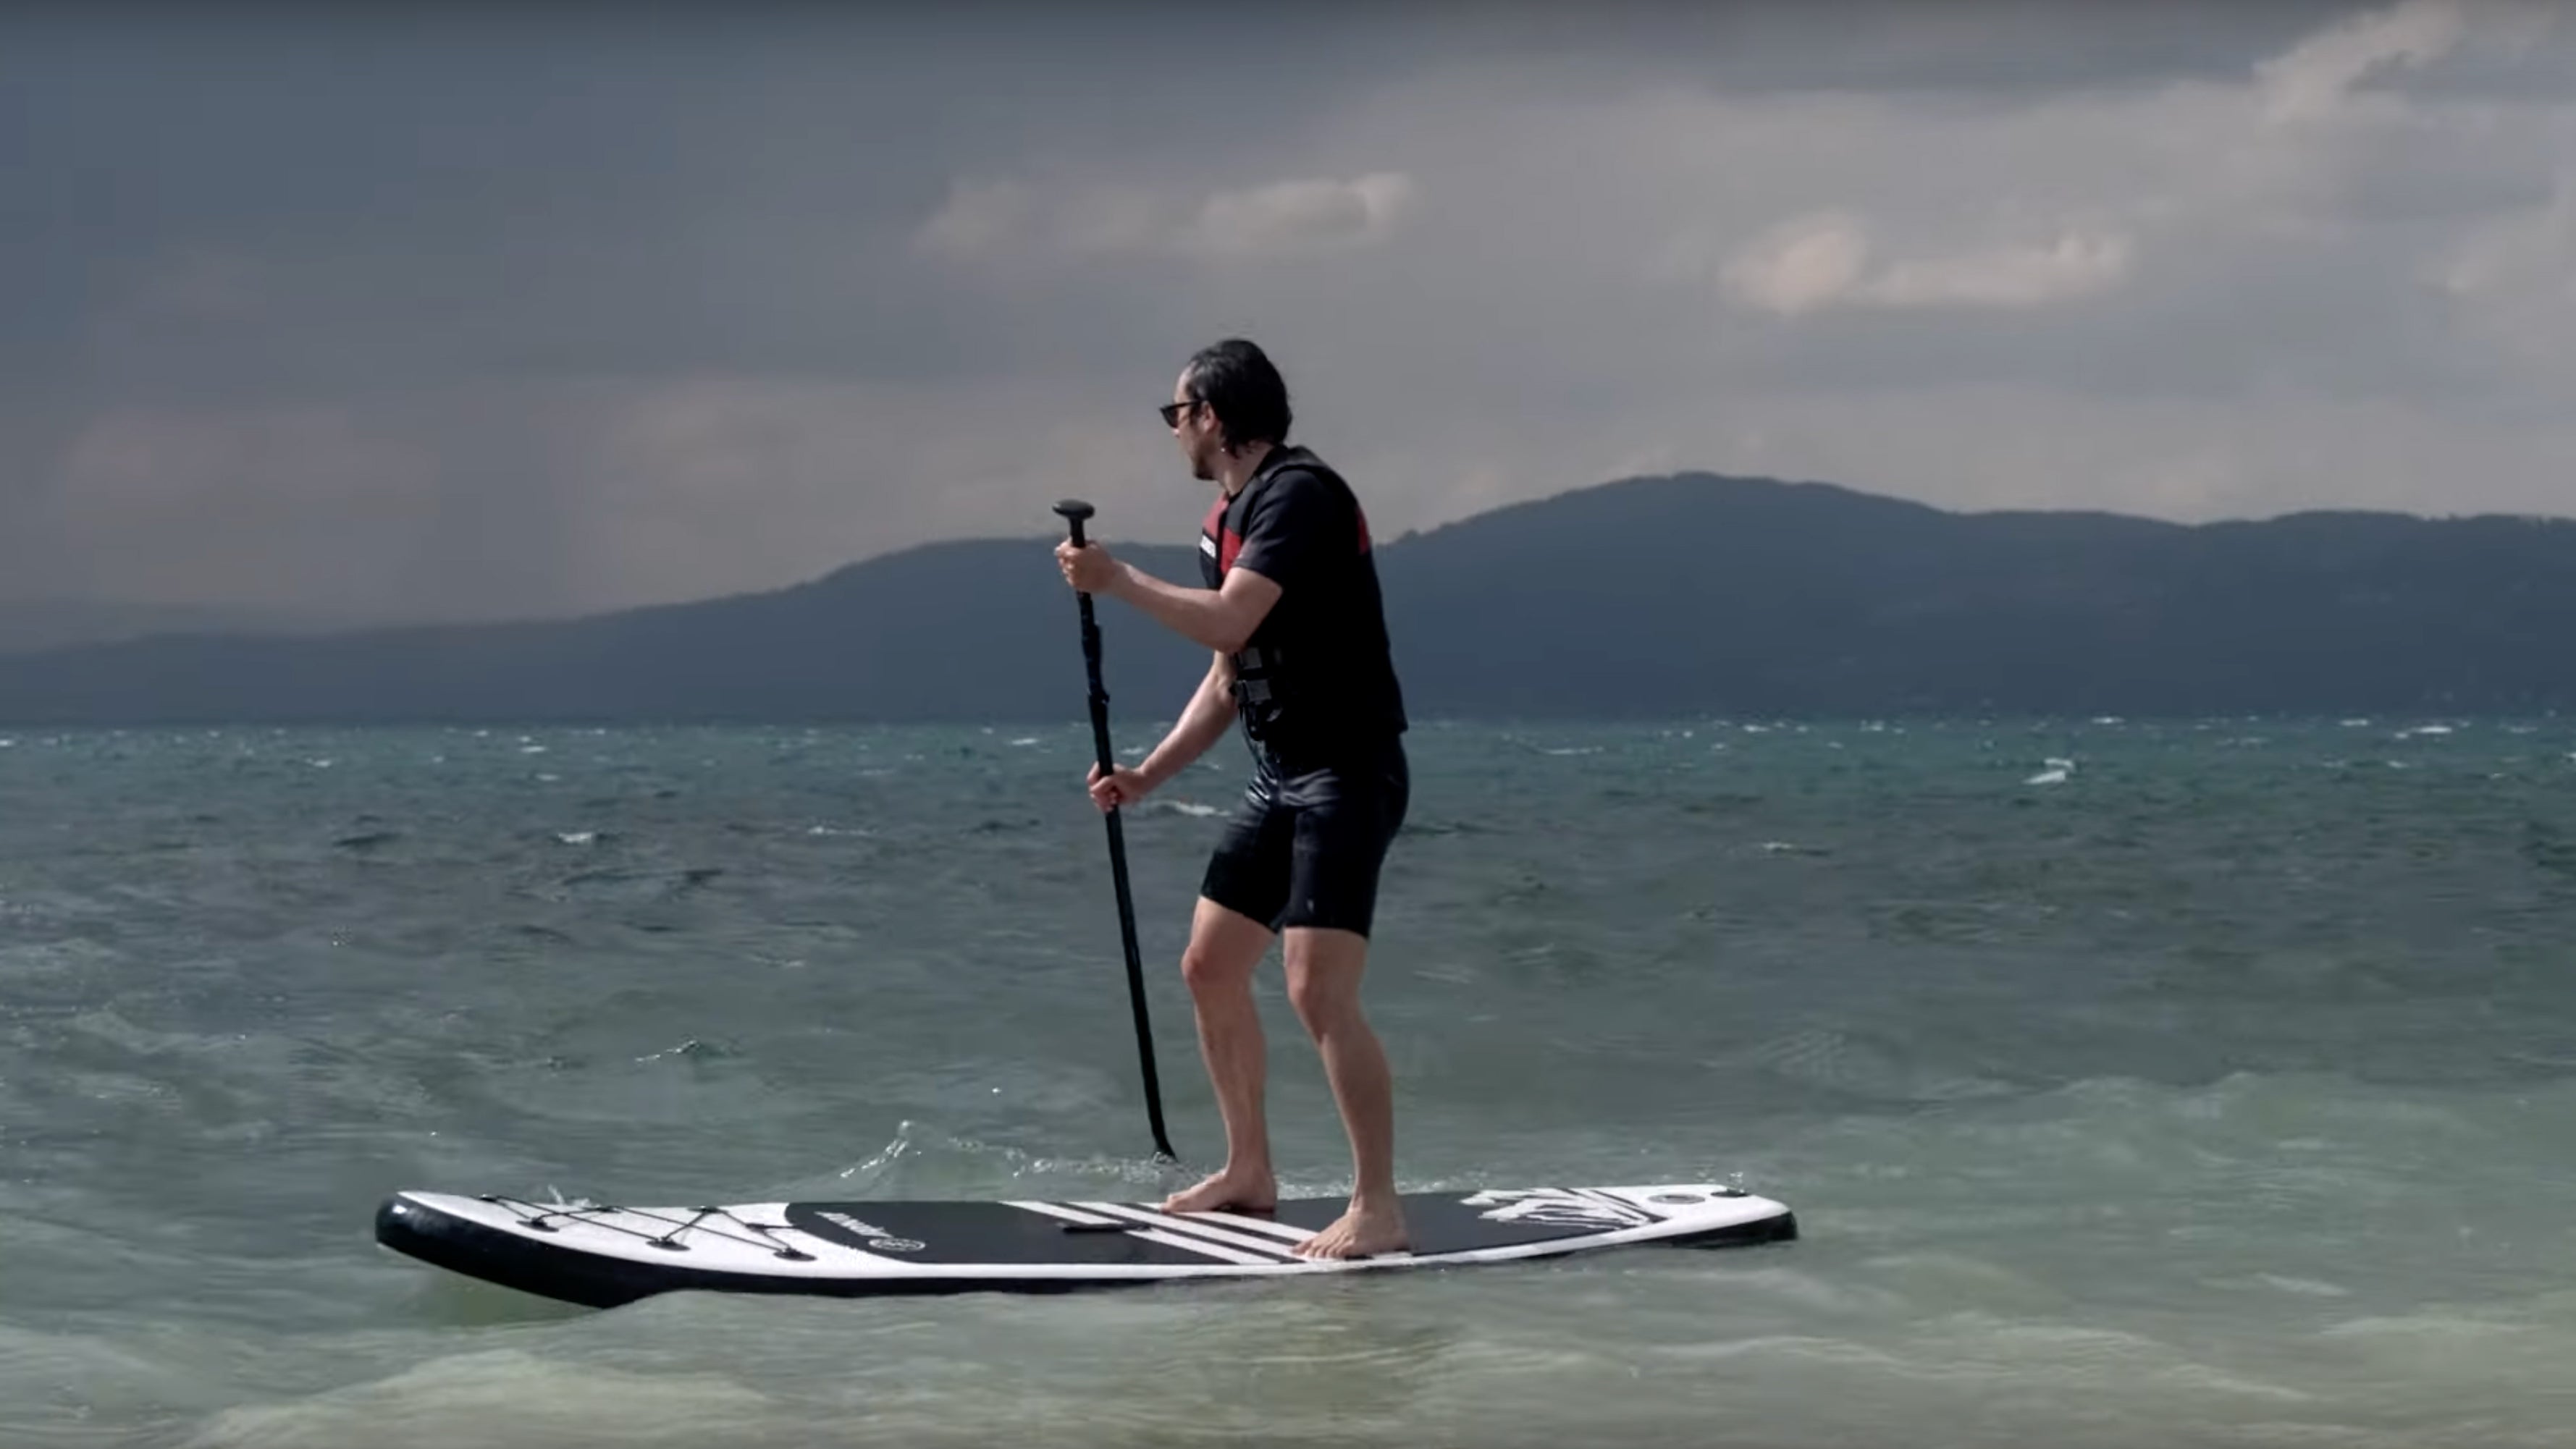 Man standing on SUP board in sea